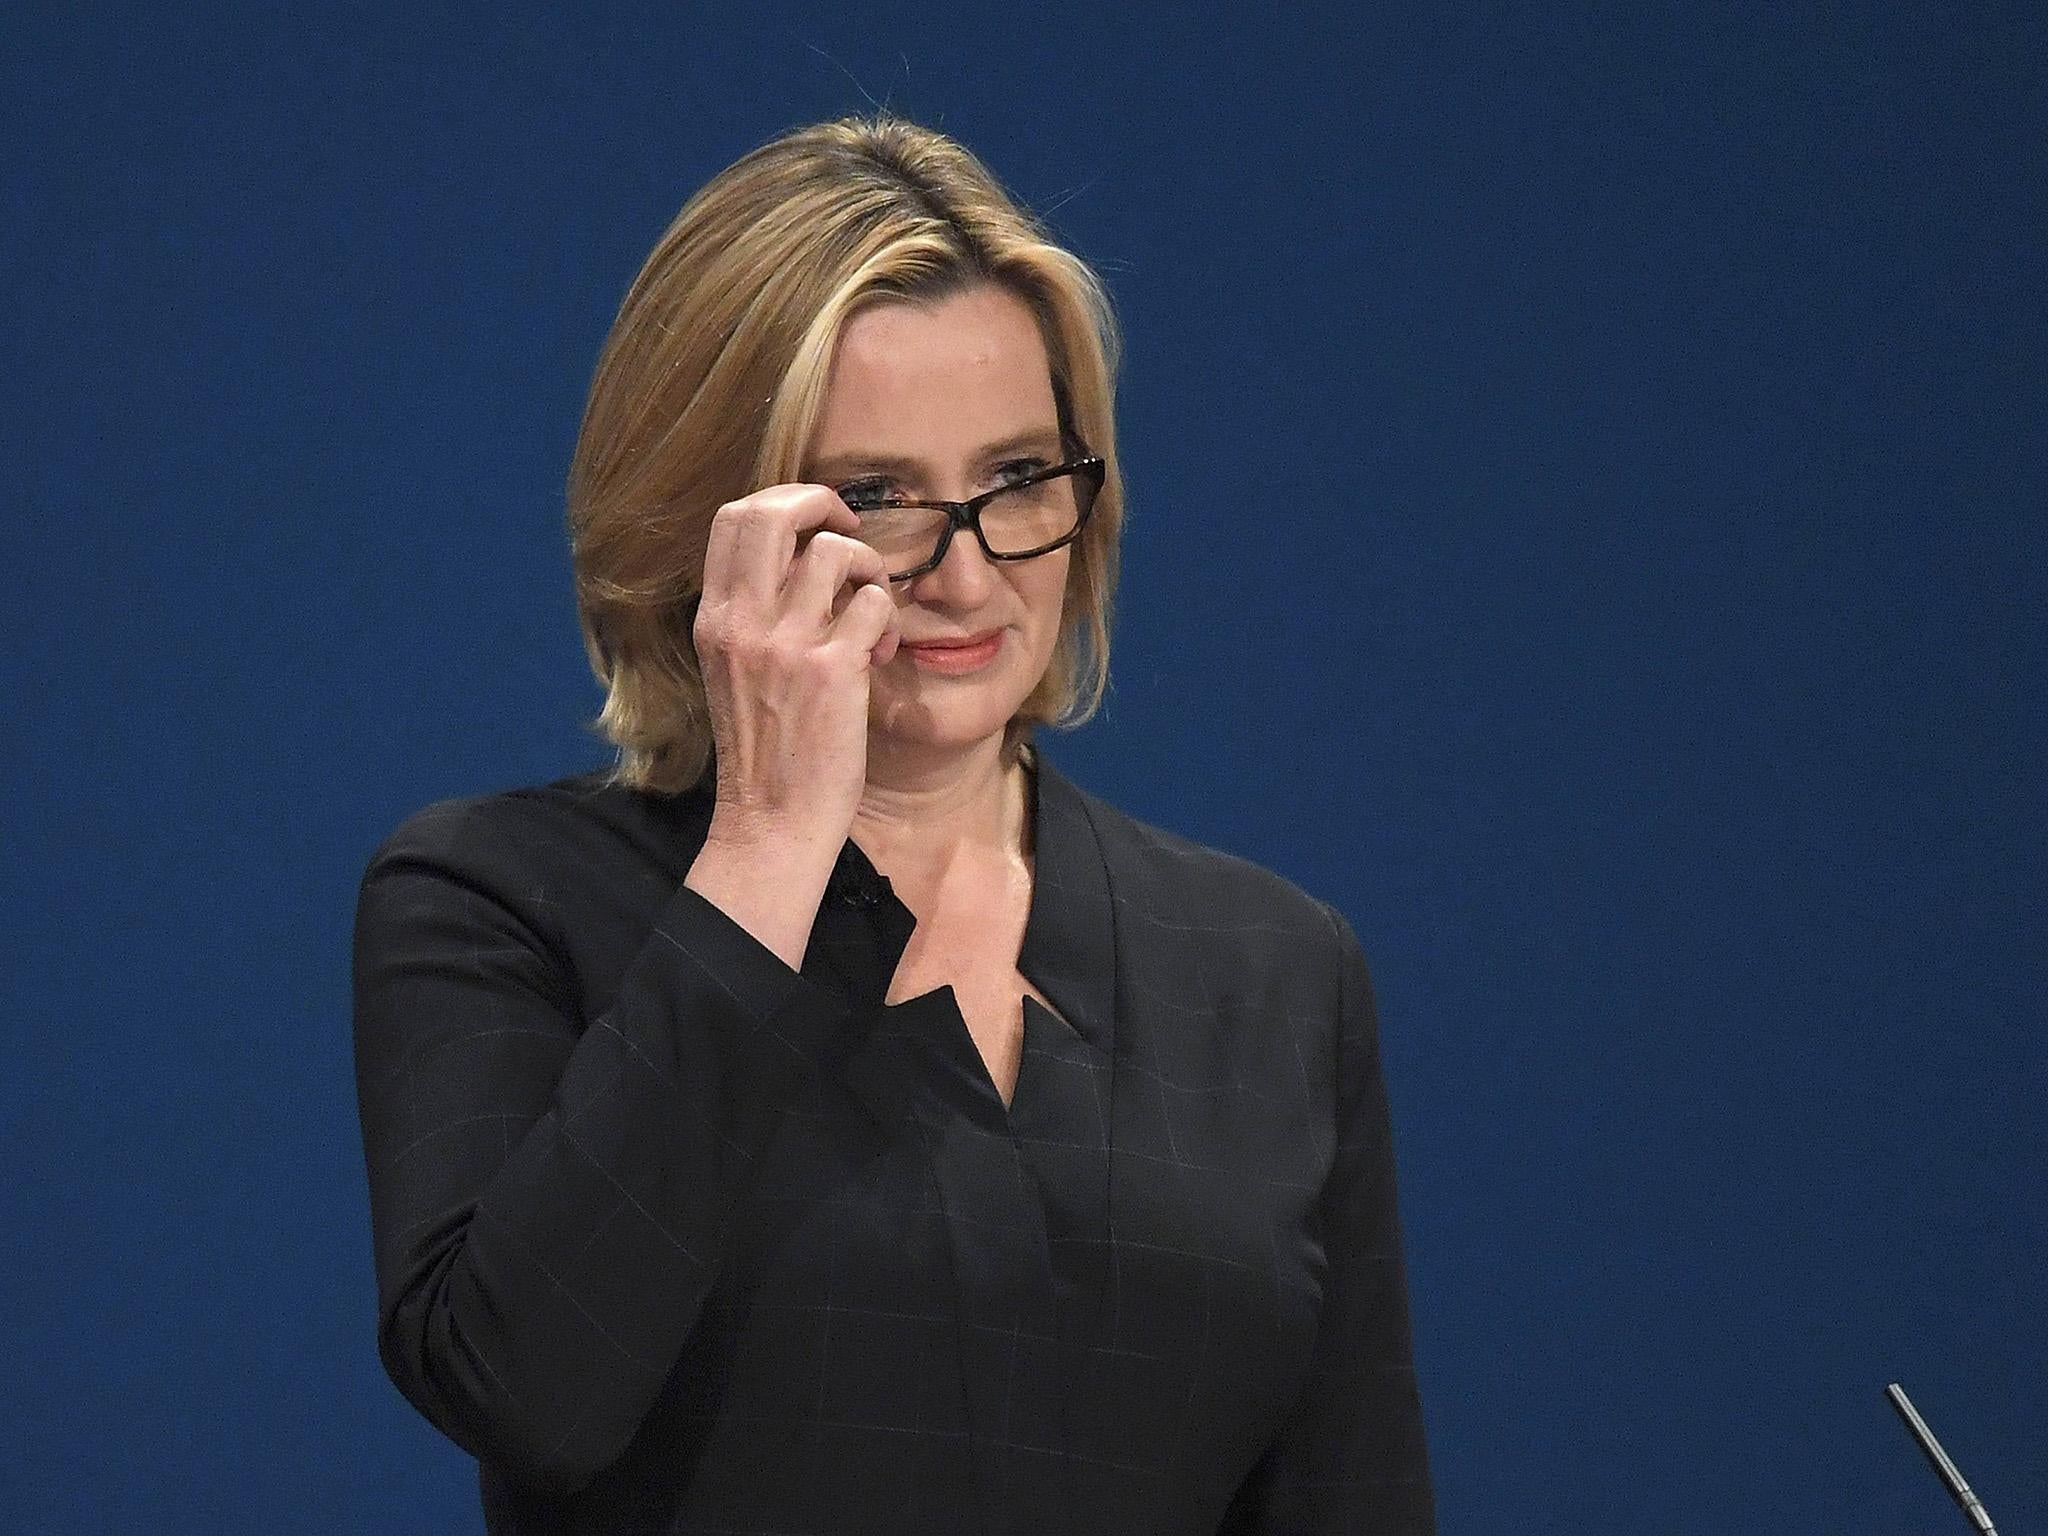 Amber Rudd delivers her keynote address at the annual Conservative Party Conference in Birmingham